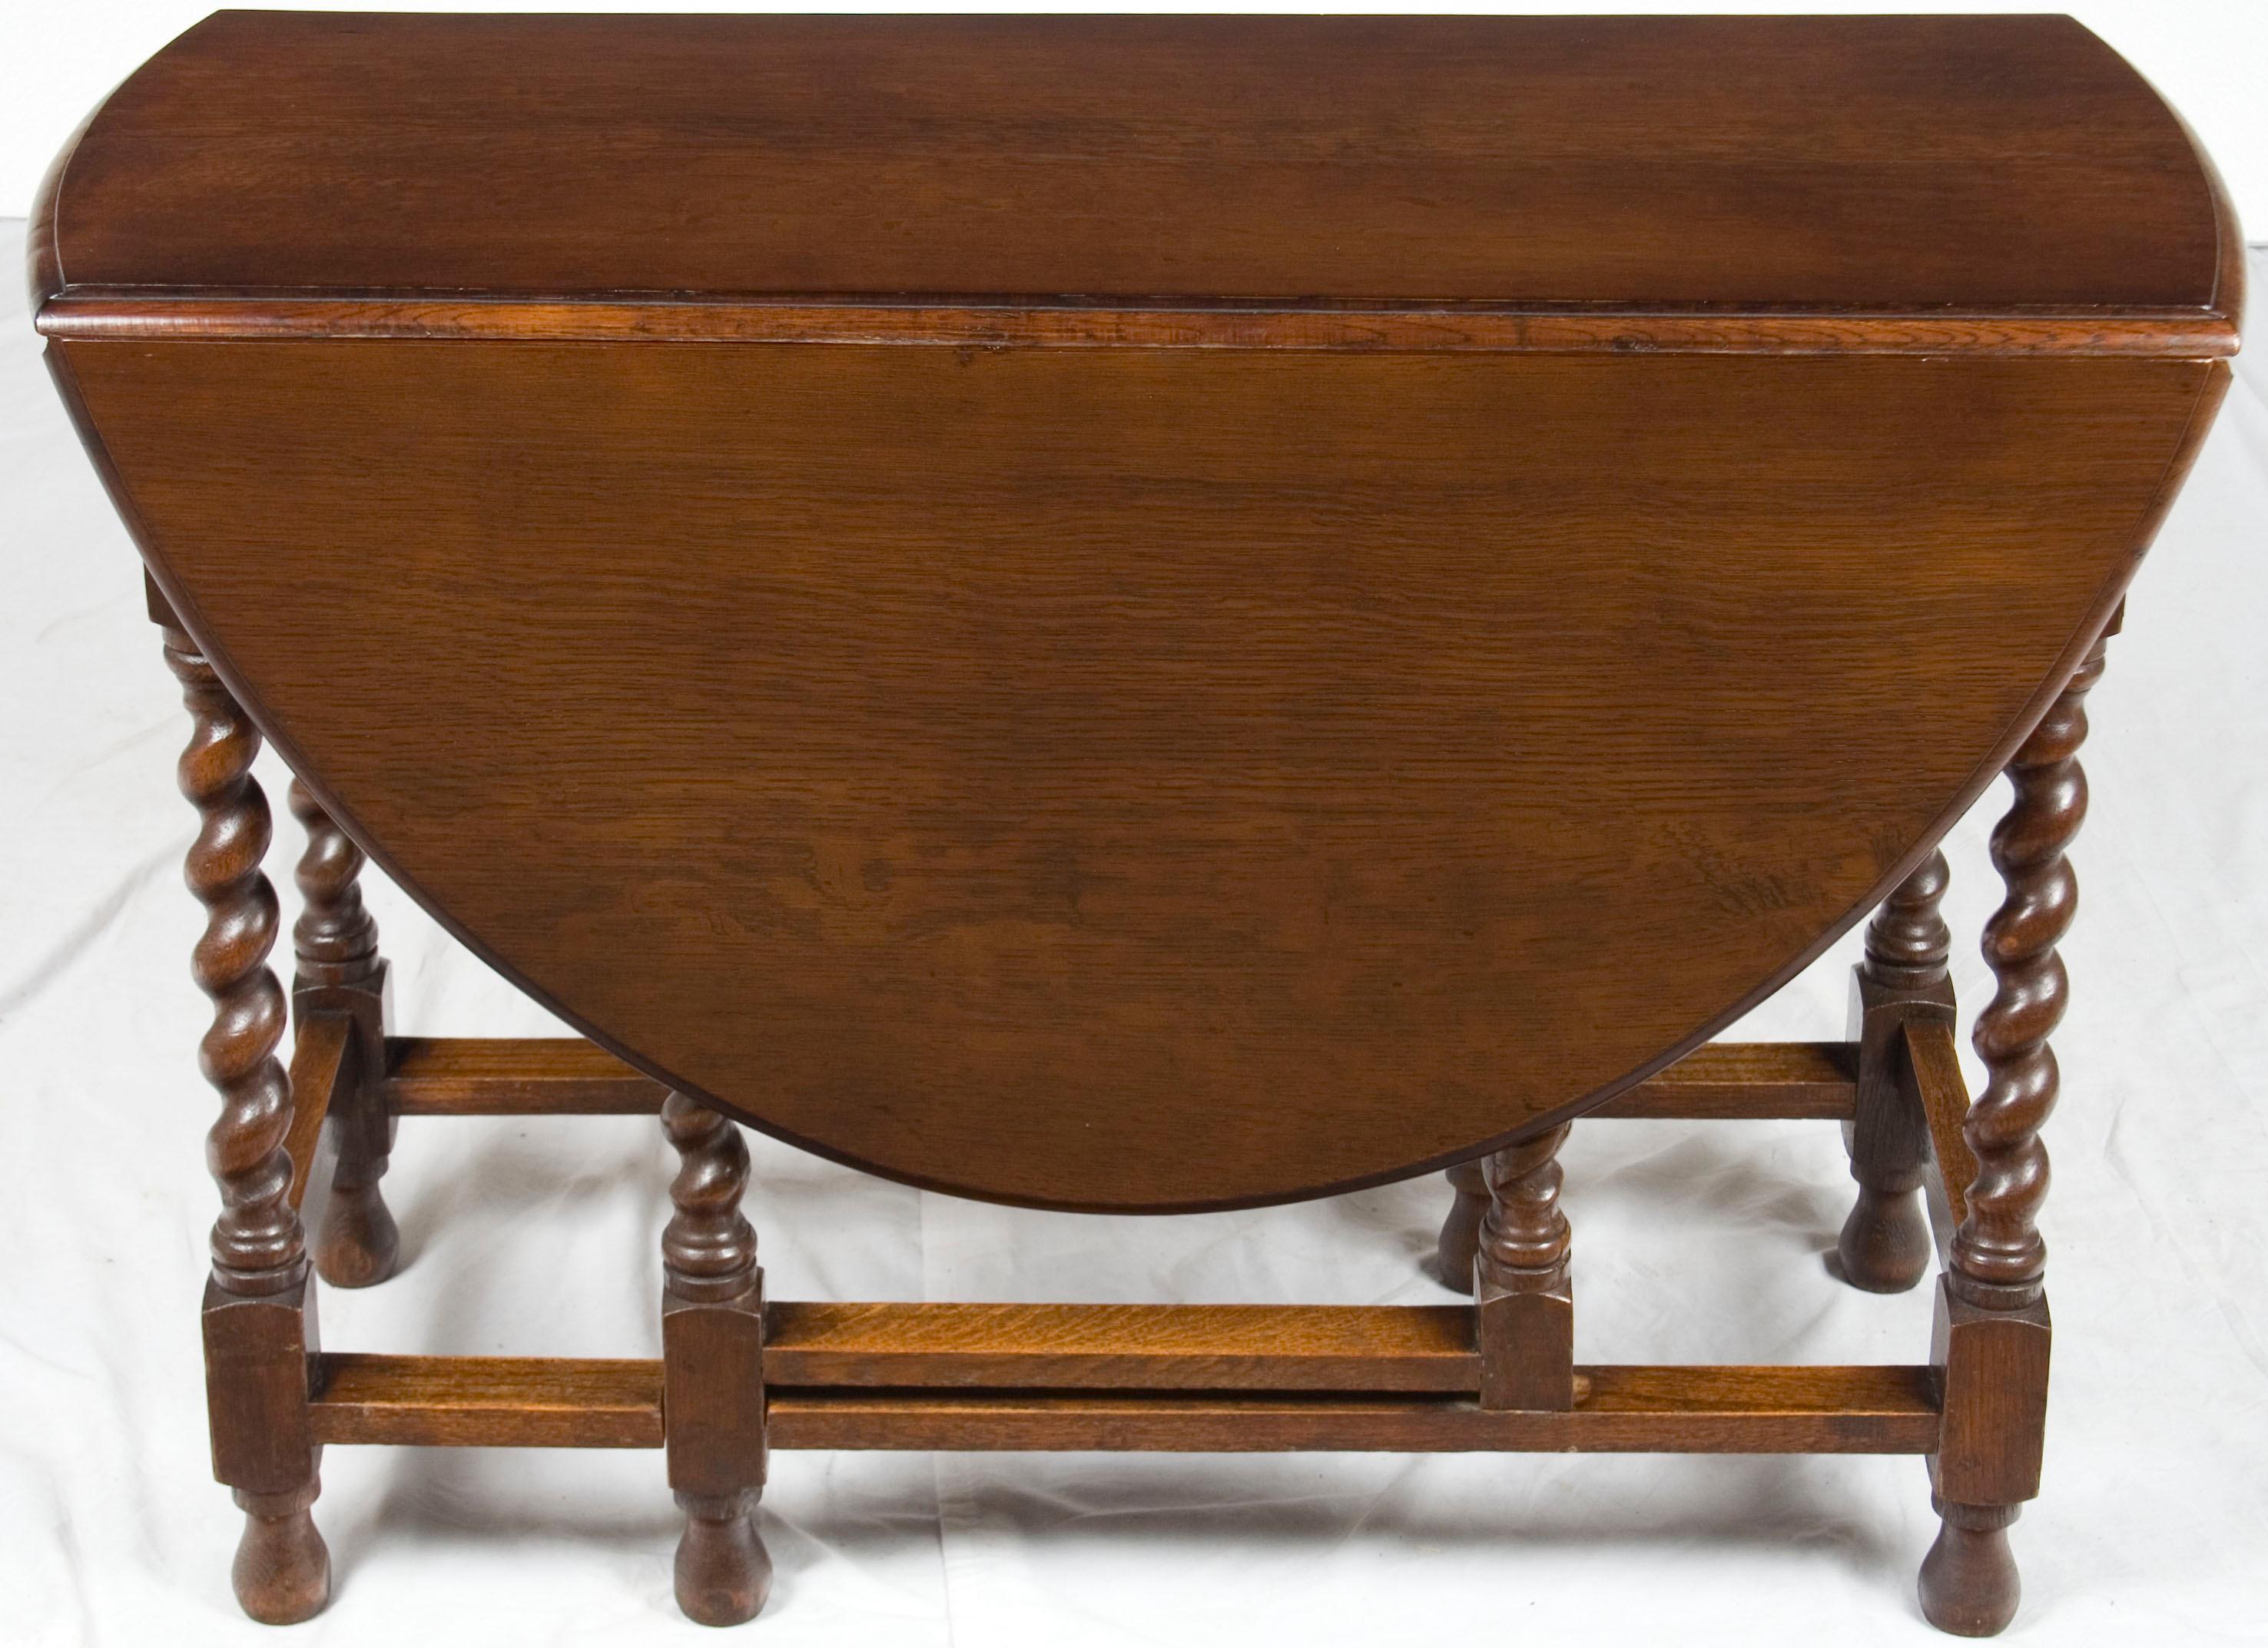 A fine example of English craftsmanship, this lovely gate leg table was handcrafted, circa 1920. Today it is a very beautiful and charming piece, perfect for use in the home or office as a side or dining table.

English cabinetmakers first began